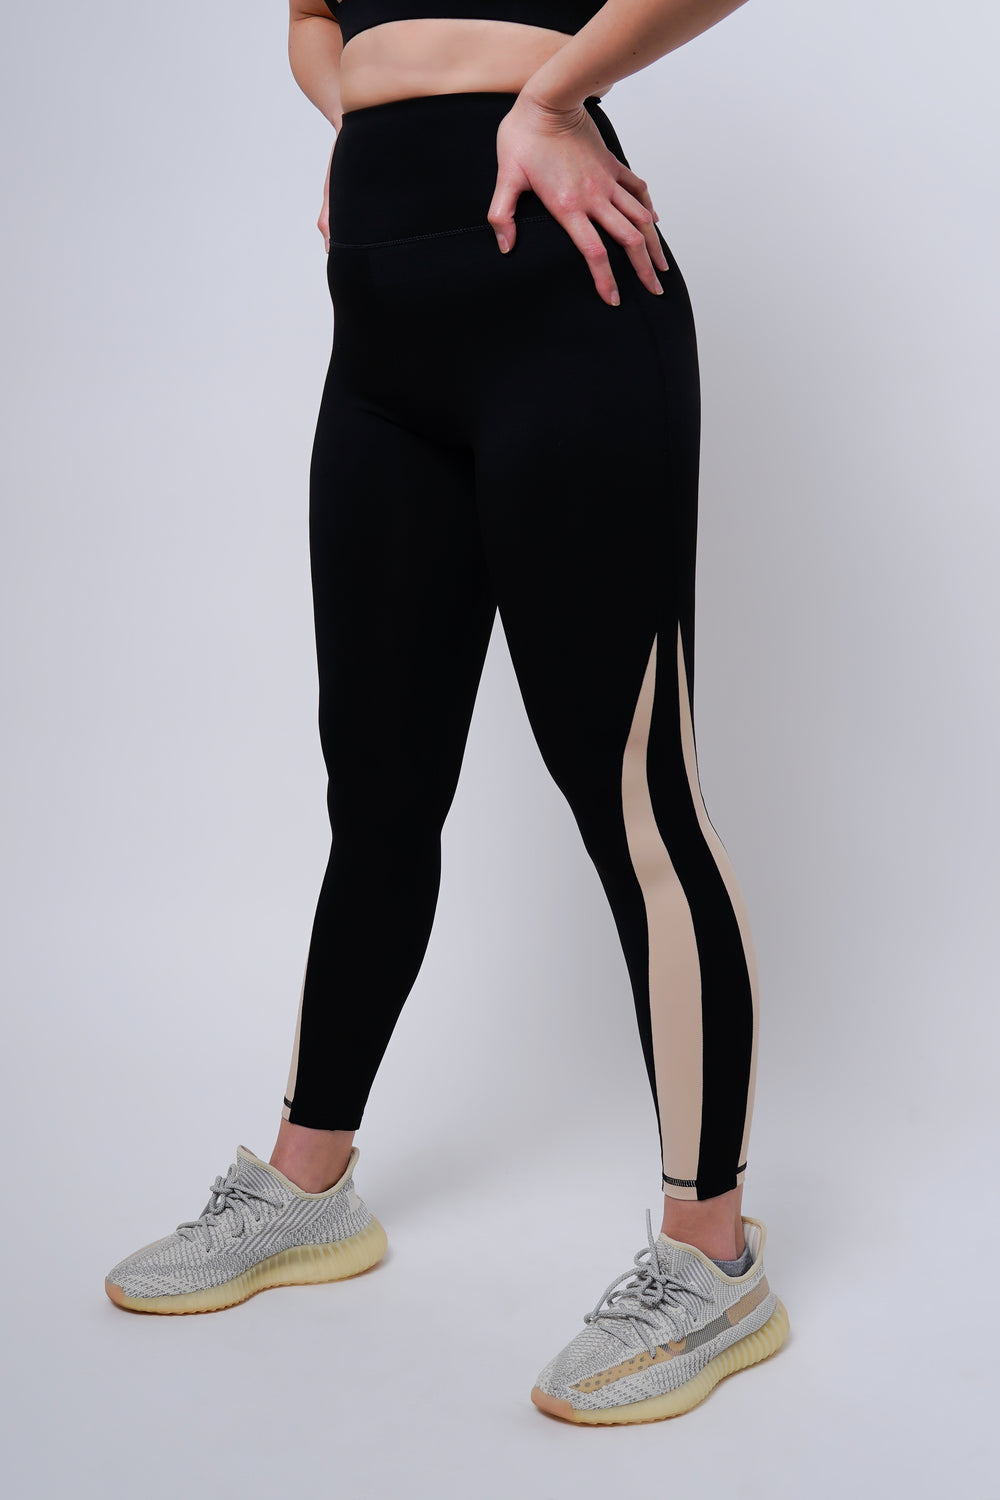 nud-active-sports-collection-bottoms-leggings-030